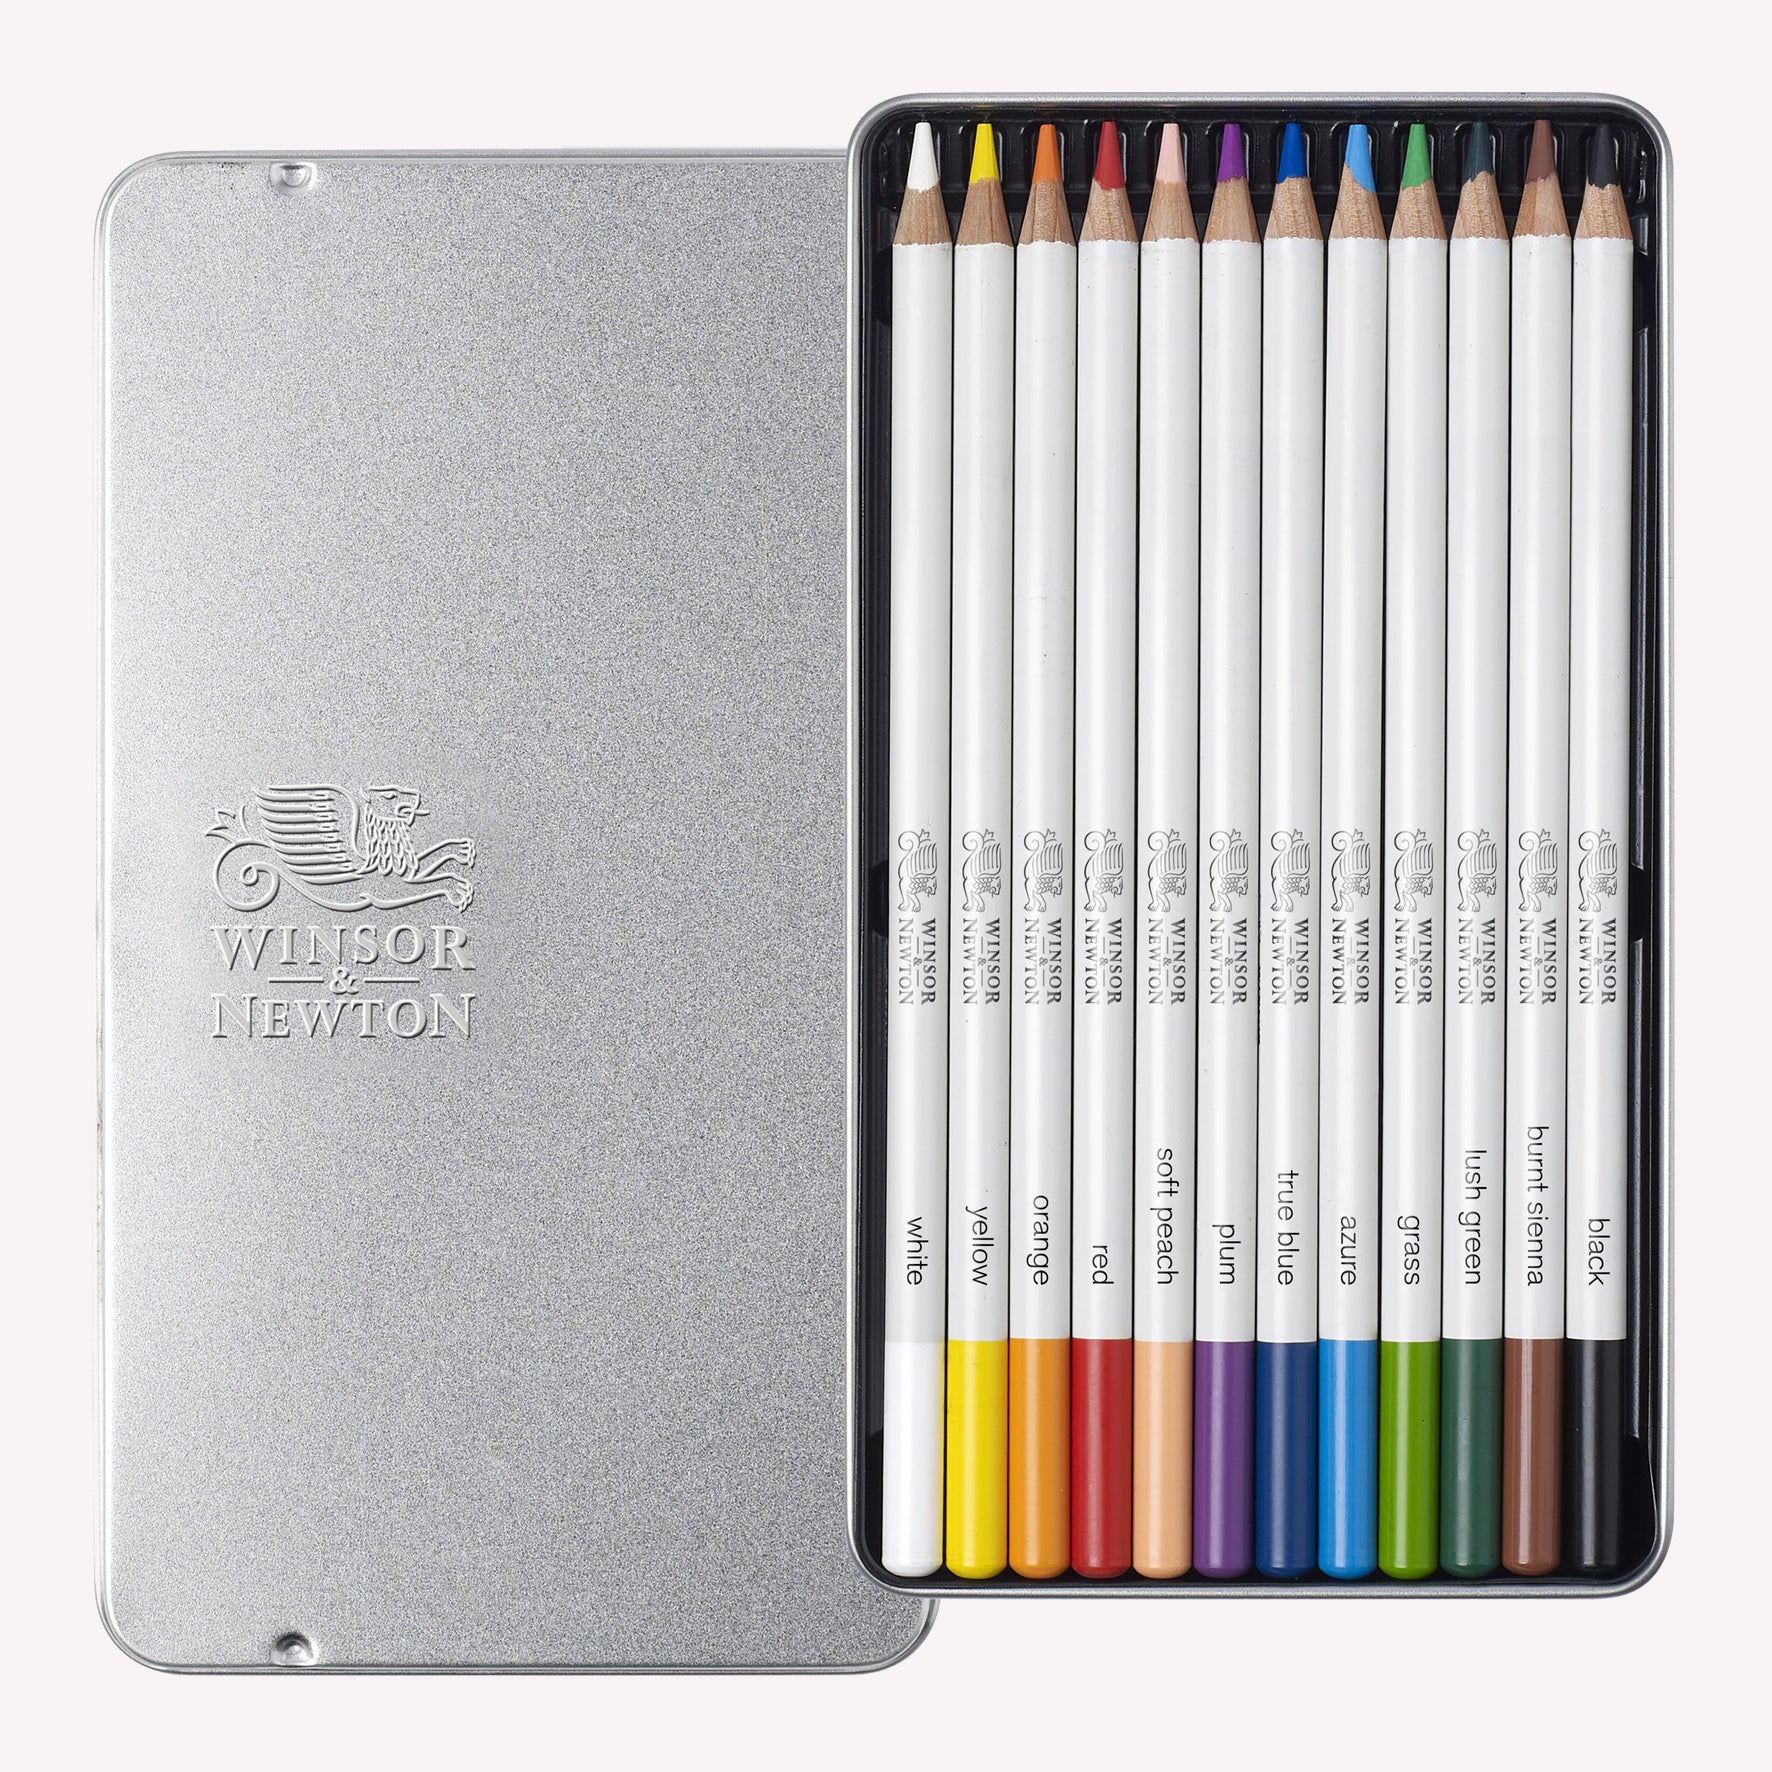 An open metal silver tin containing Winsor and Newton’s Set of 12 Studio Collection Watercolour pencils. Coloured pencils included in the set are white, yellow, orange, red, soft peach, azure, plum, lush green, true blue, grass, burnt Sienna and black. 